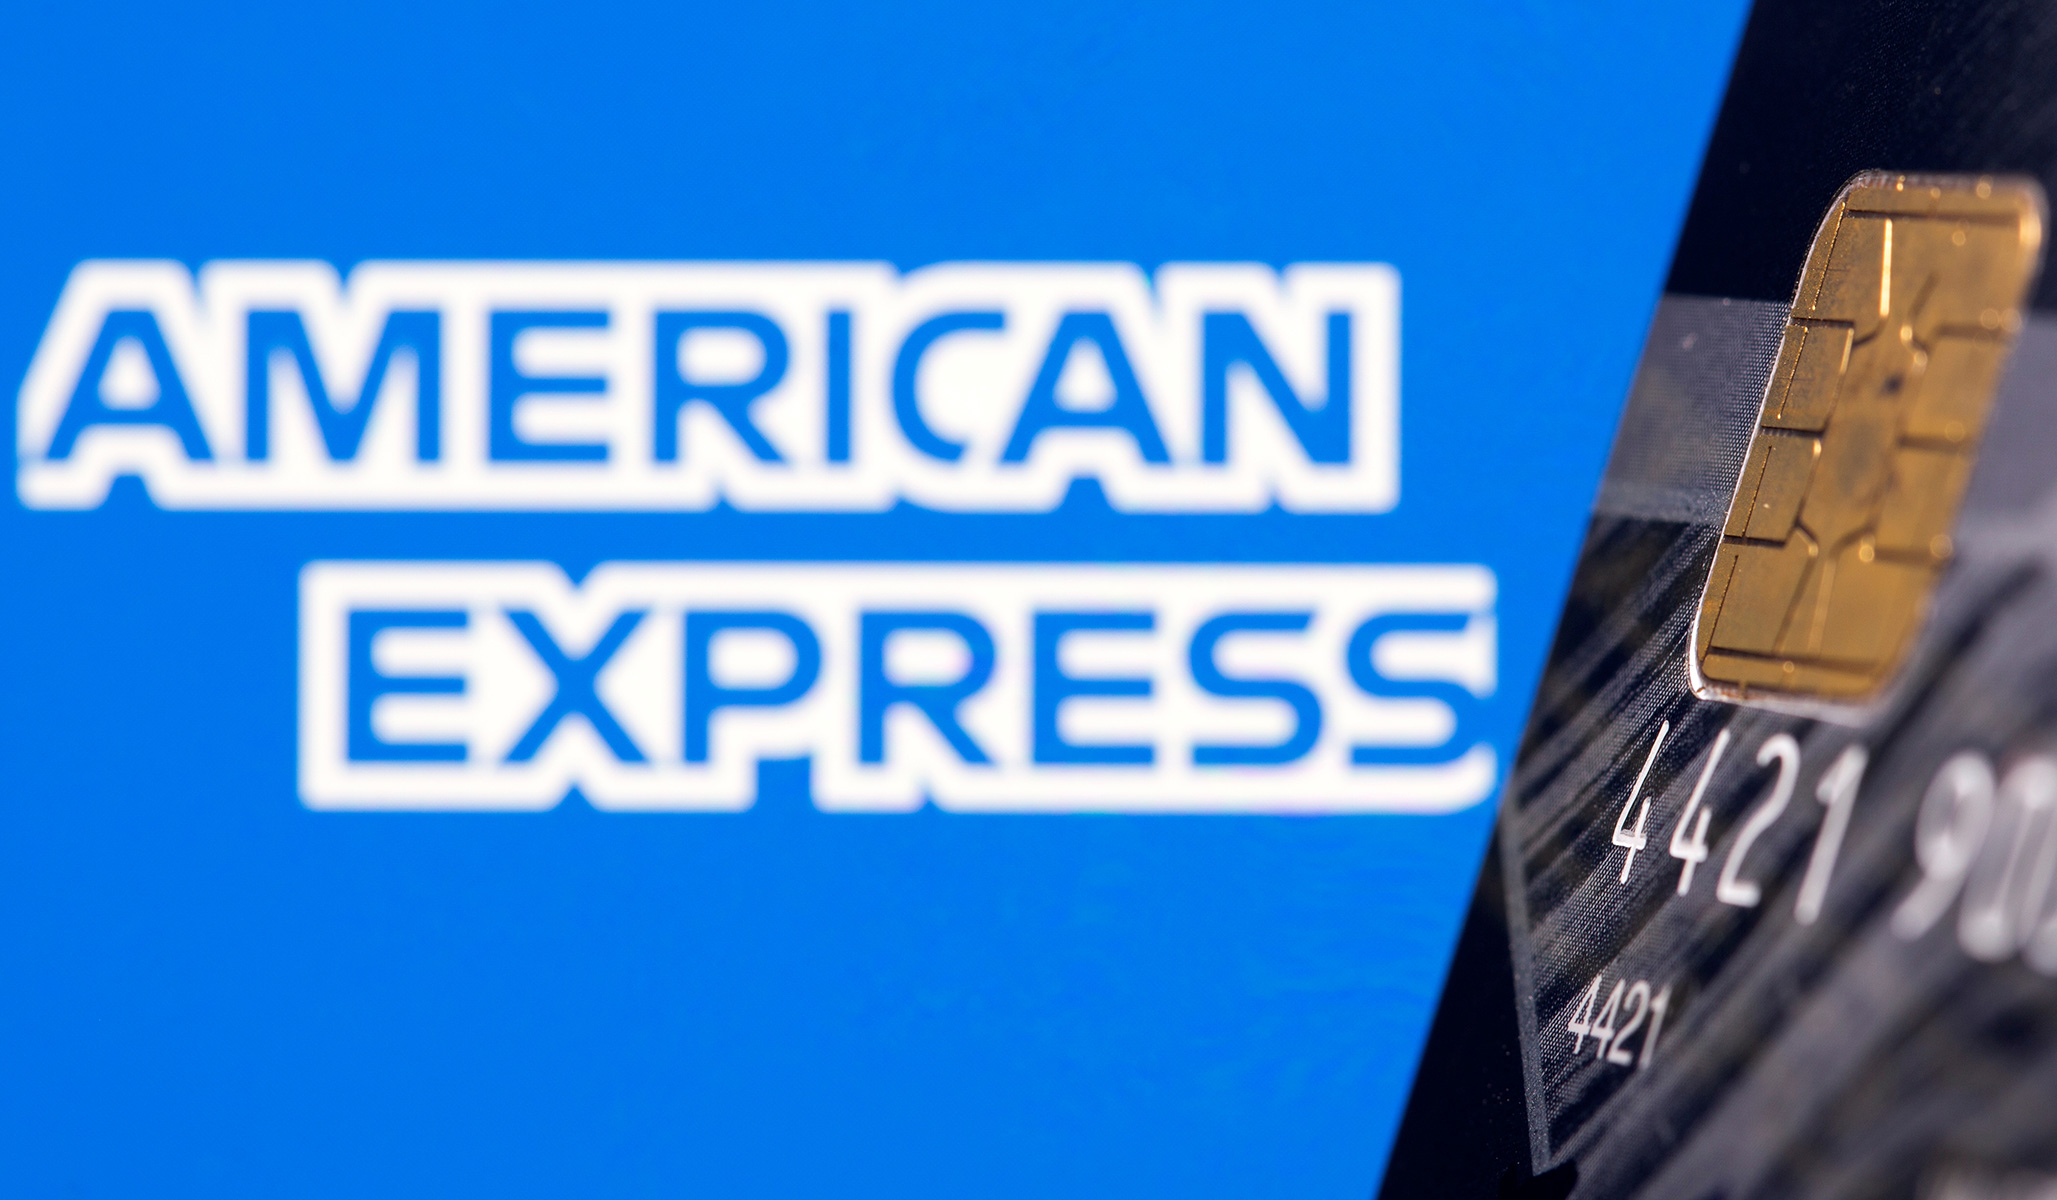 American Express Employees Were Told Capitalism is Racist in